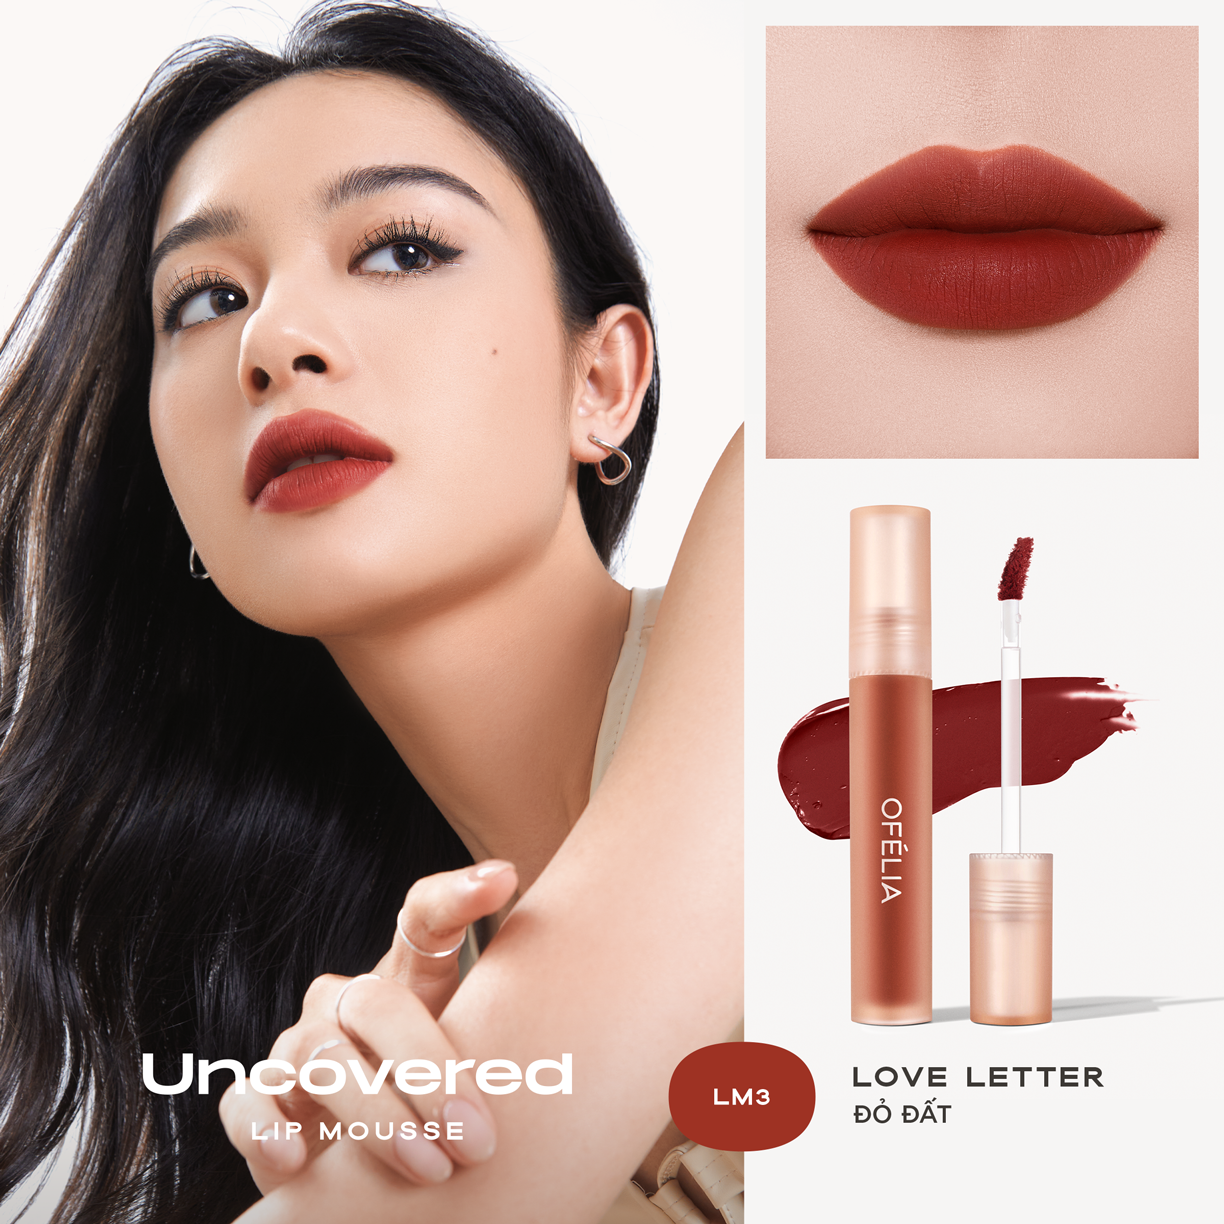 SET 2 UNCOVERED LIP MOUSSE CHAPTER 01